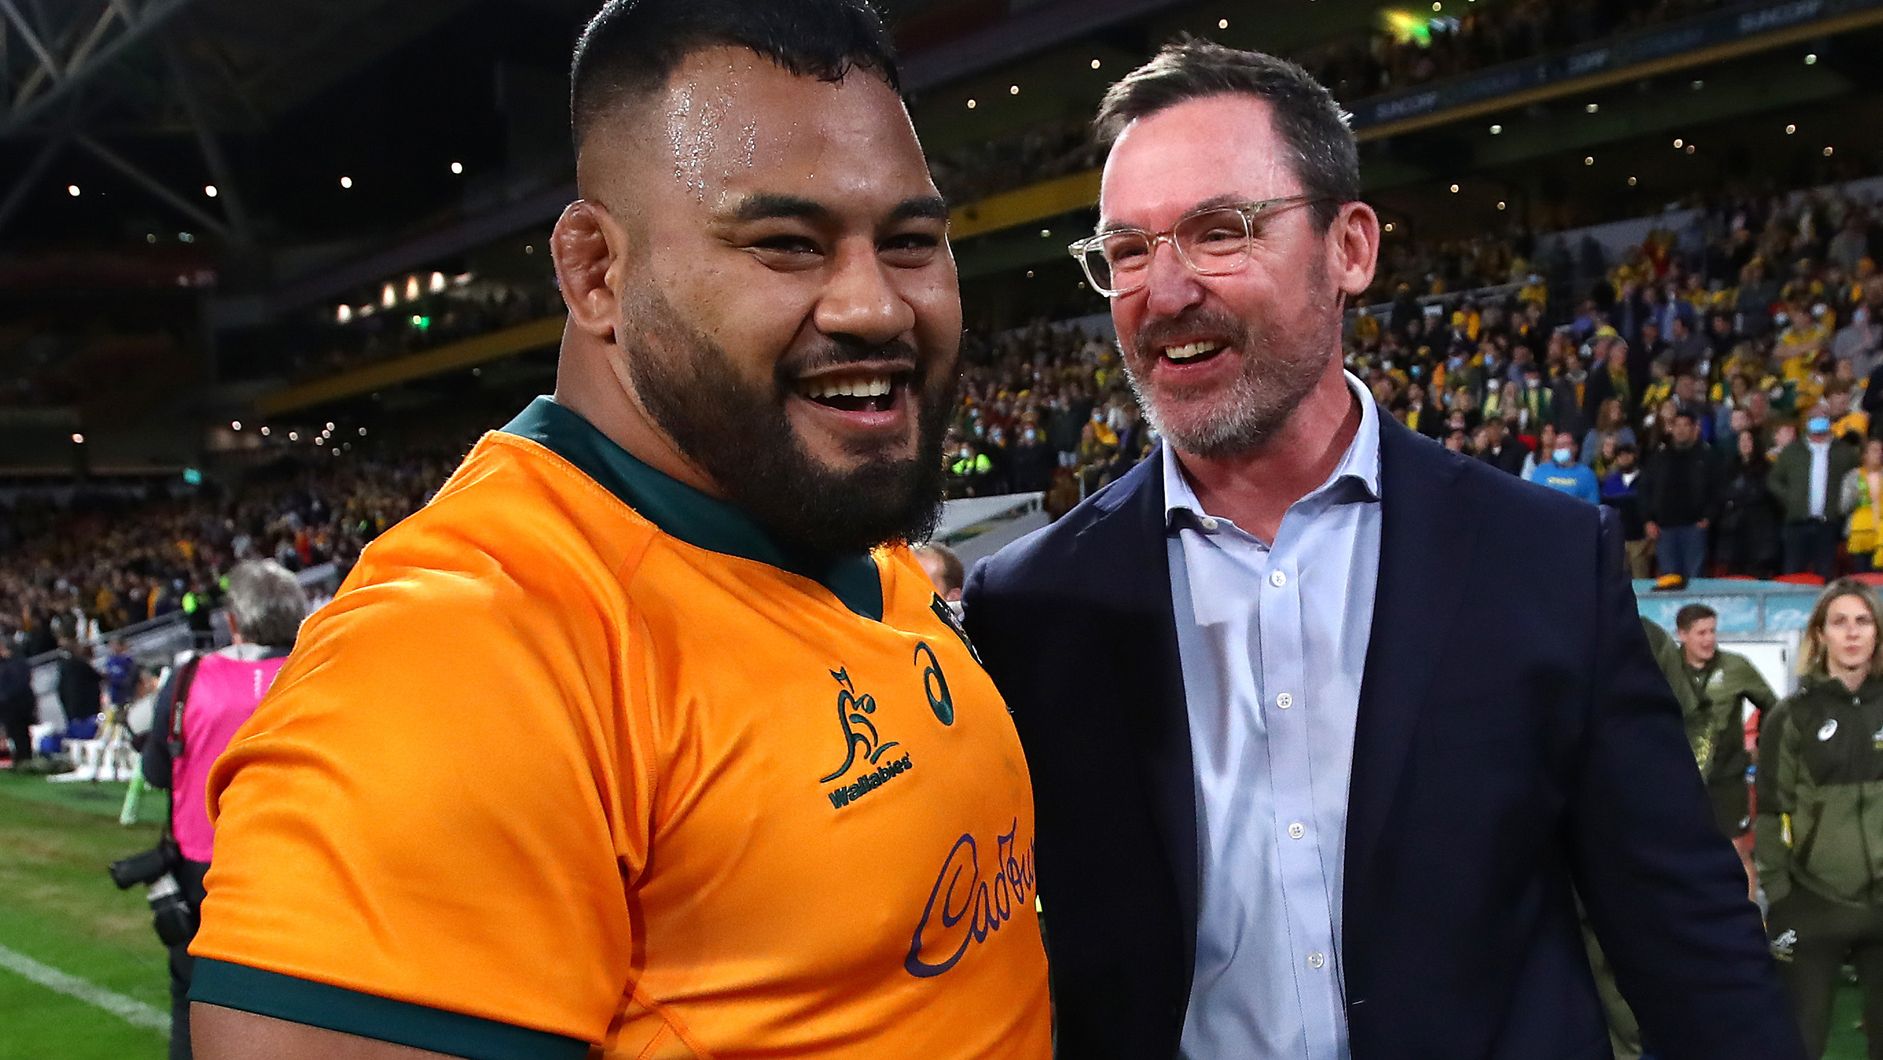 Taniela Tupou and assistant coach Dan McKellar of the Wallabies celebrate winning the international test match between the Wallabies and France in Brisbane in 2021.